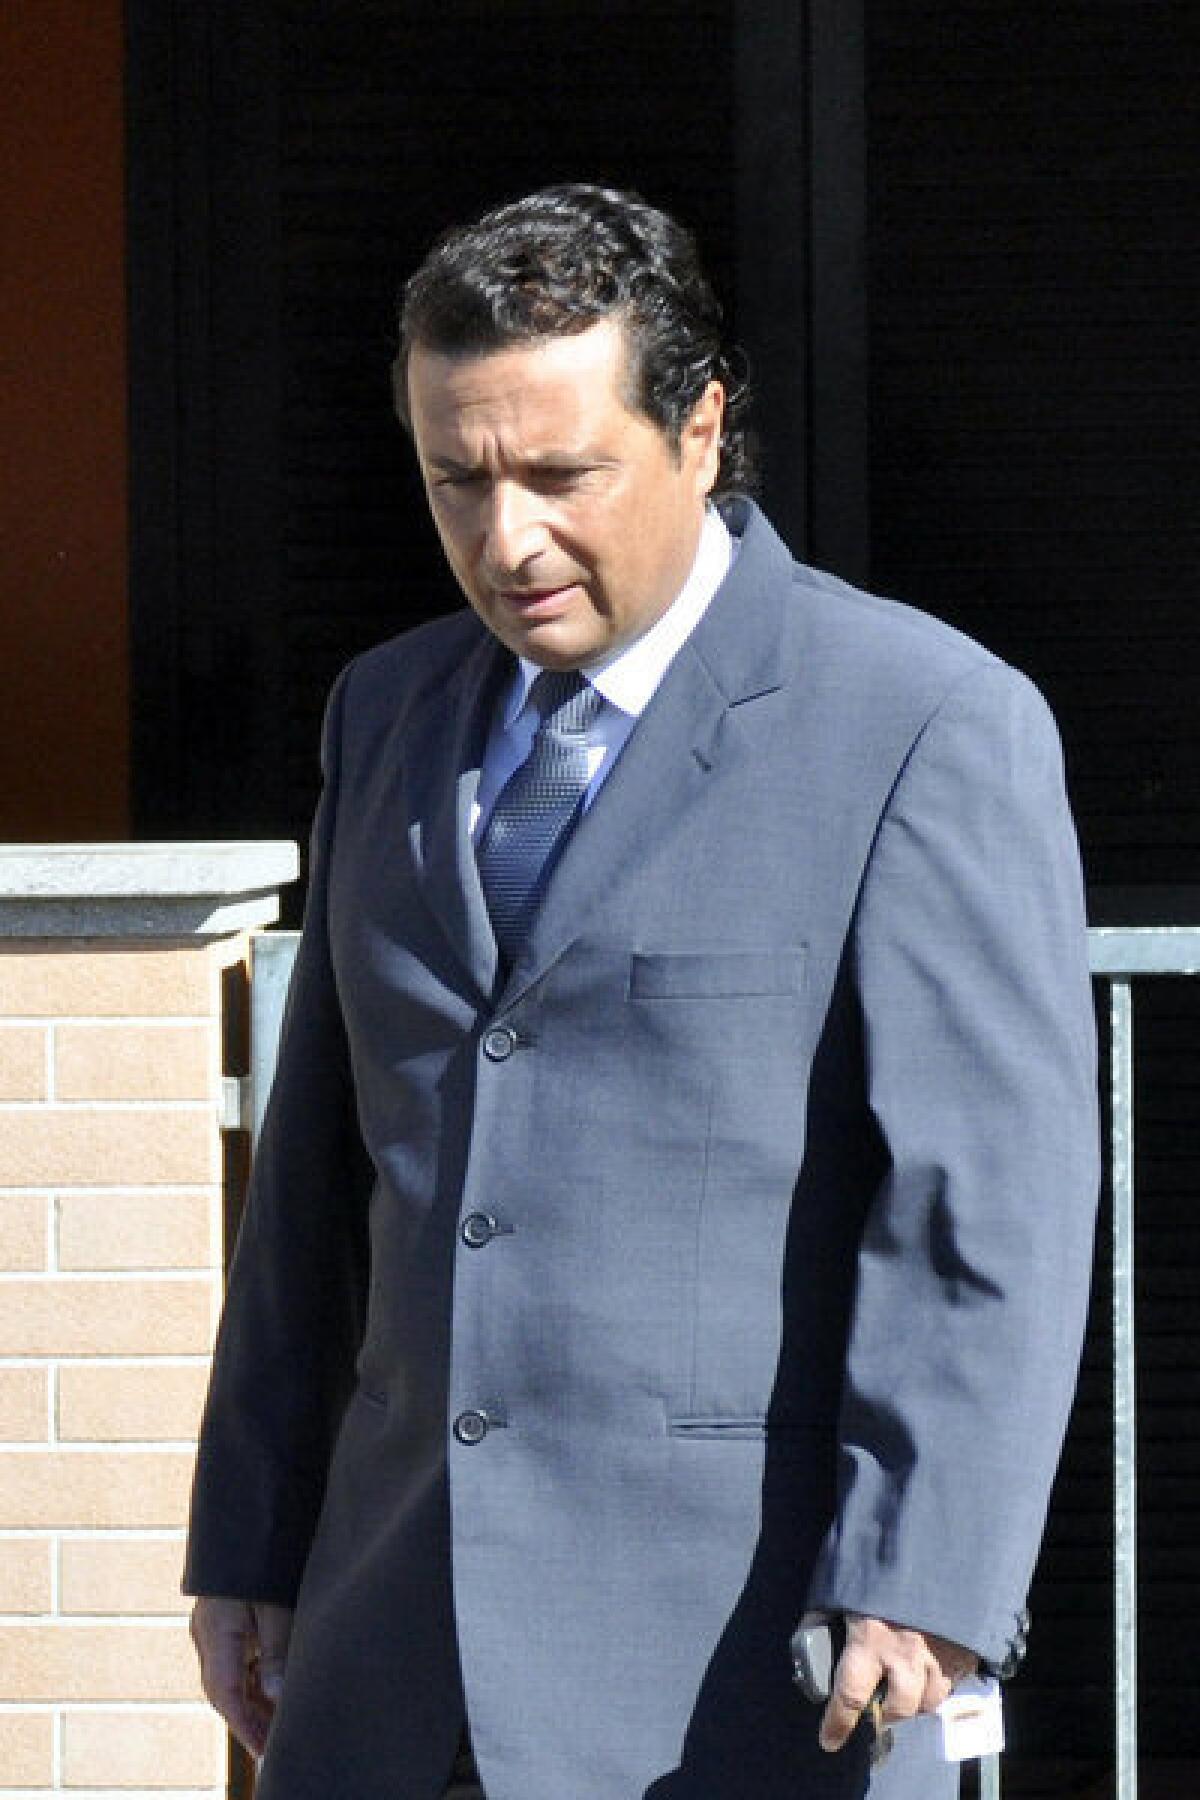 Francesco Schettino, the former captain of the Costa Concordia luxury cruise ship, leaves his house in the Italian city of Grosseto last week to attend a closed-door hearing.